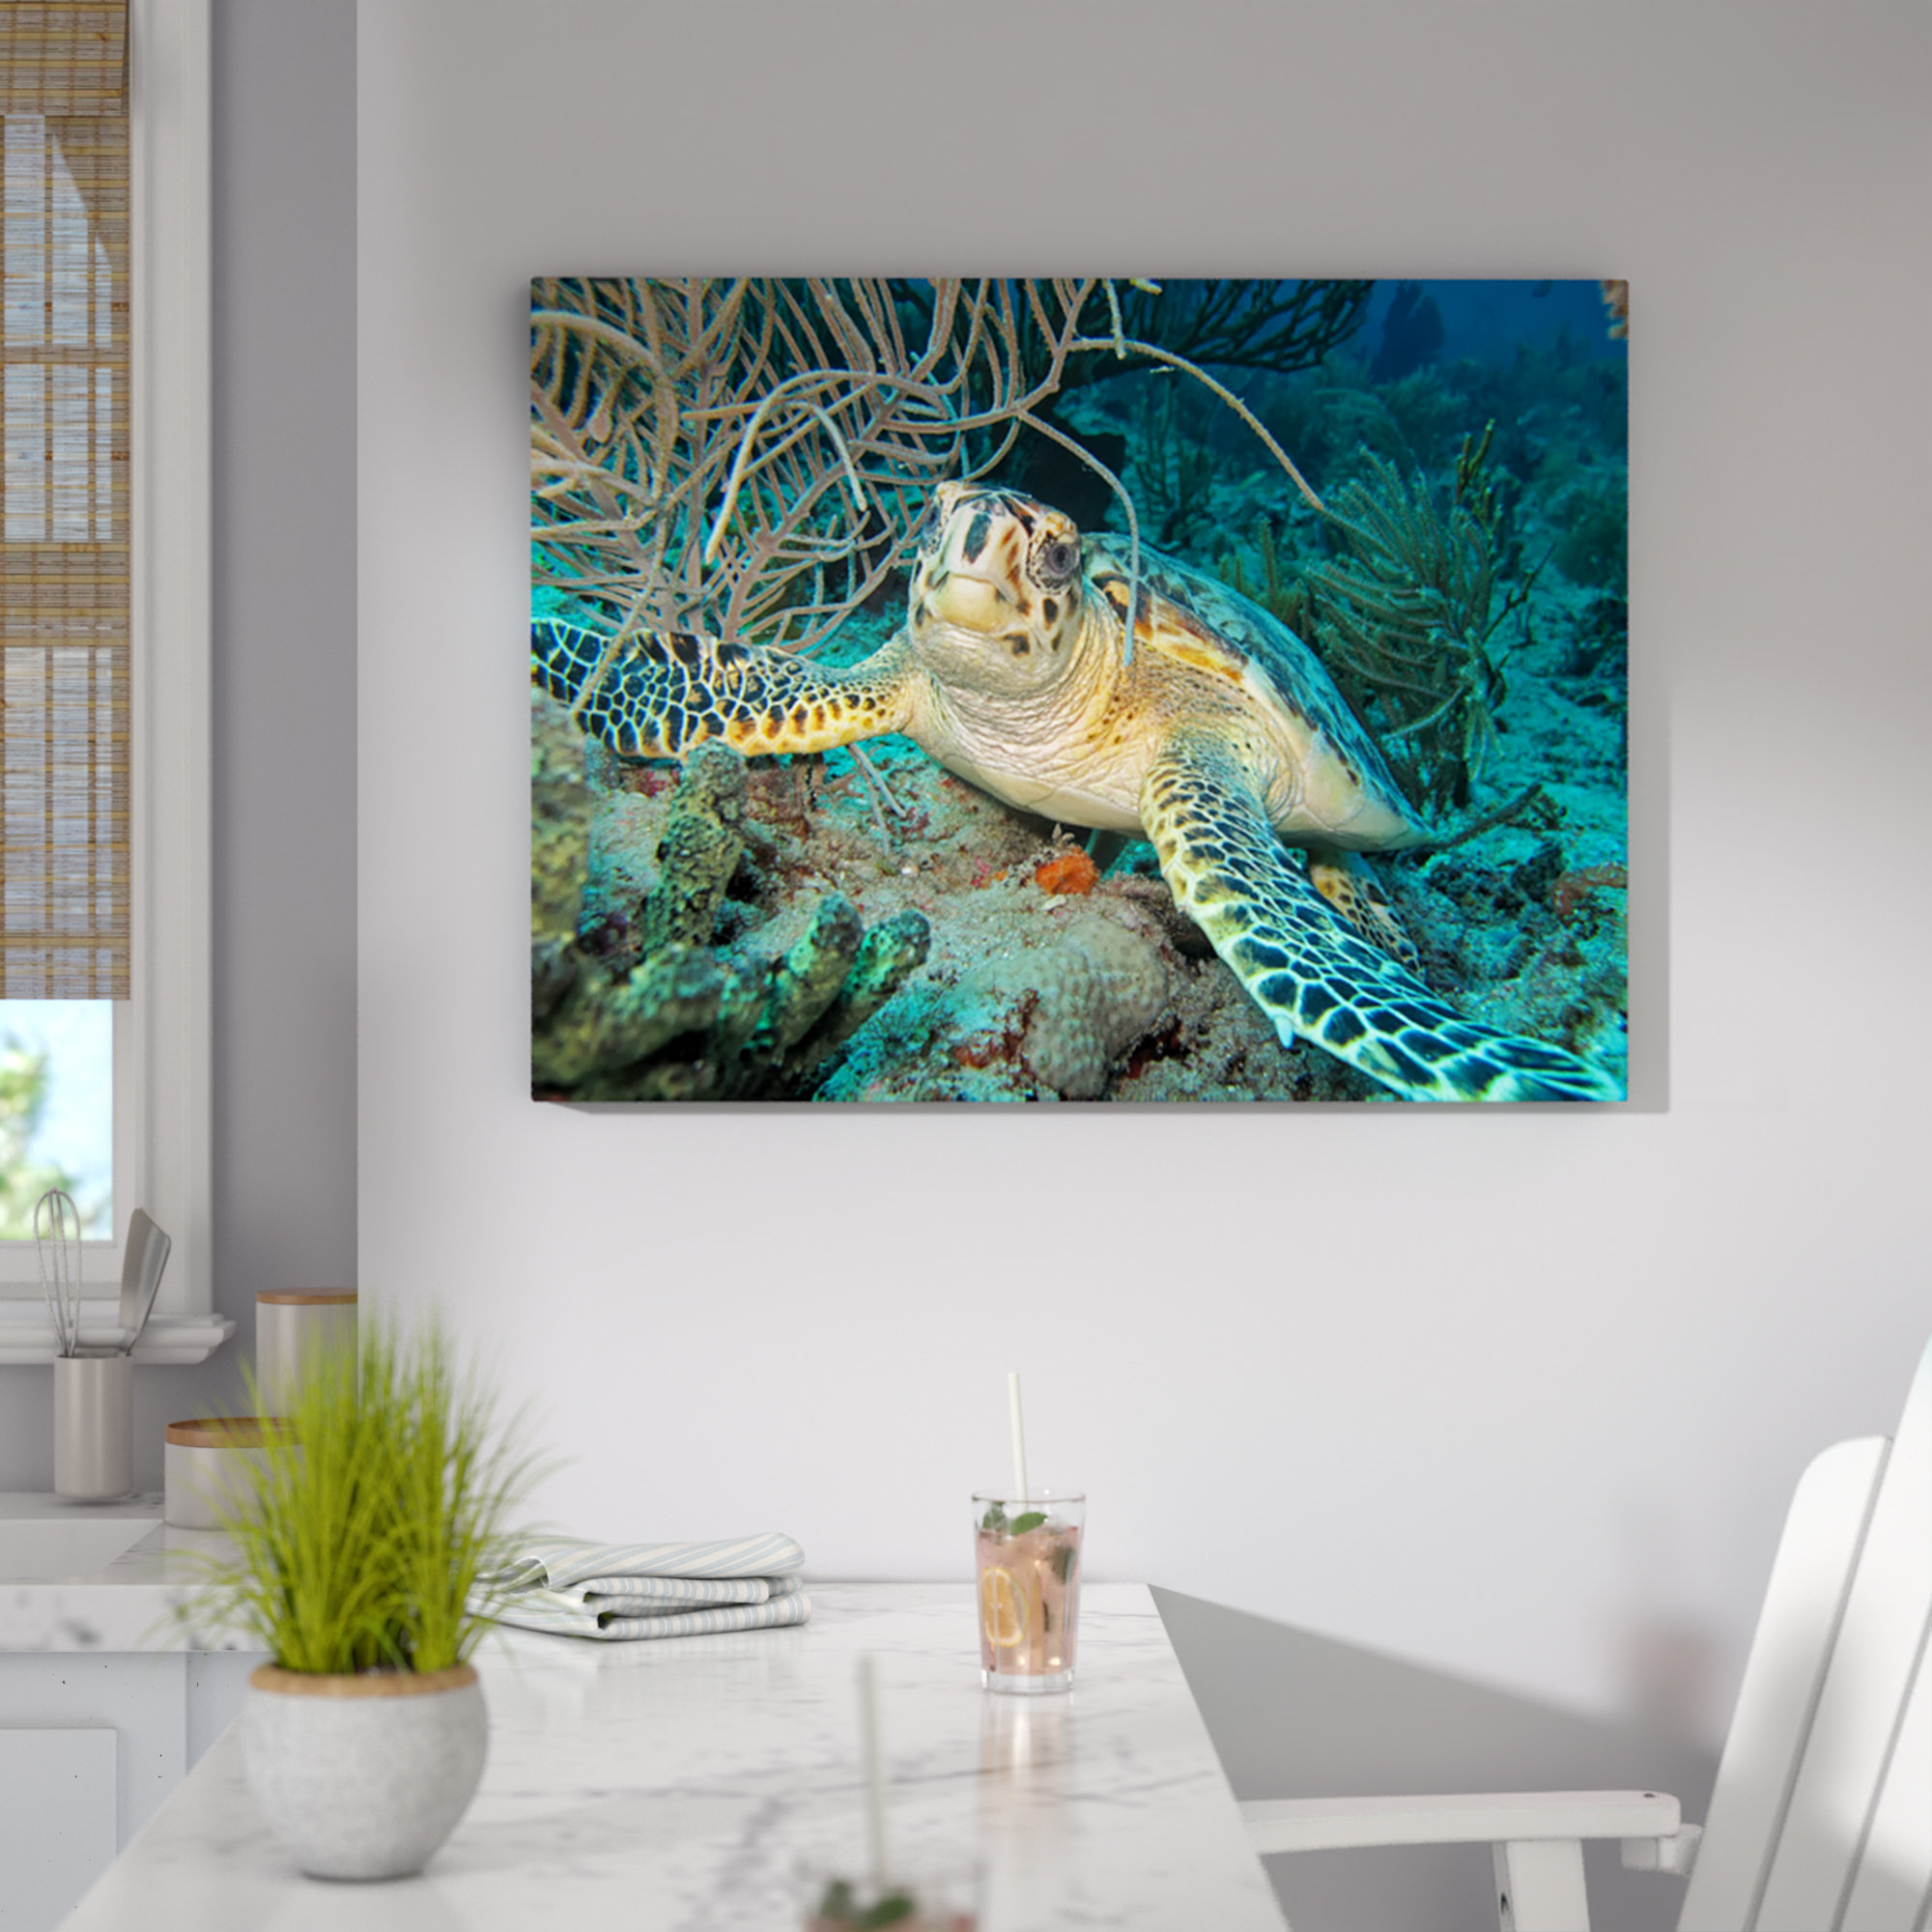 Gallery Wrapped Canvas Turtle Wall Art You Ll Love In 2020 Wayfair